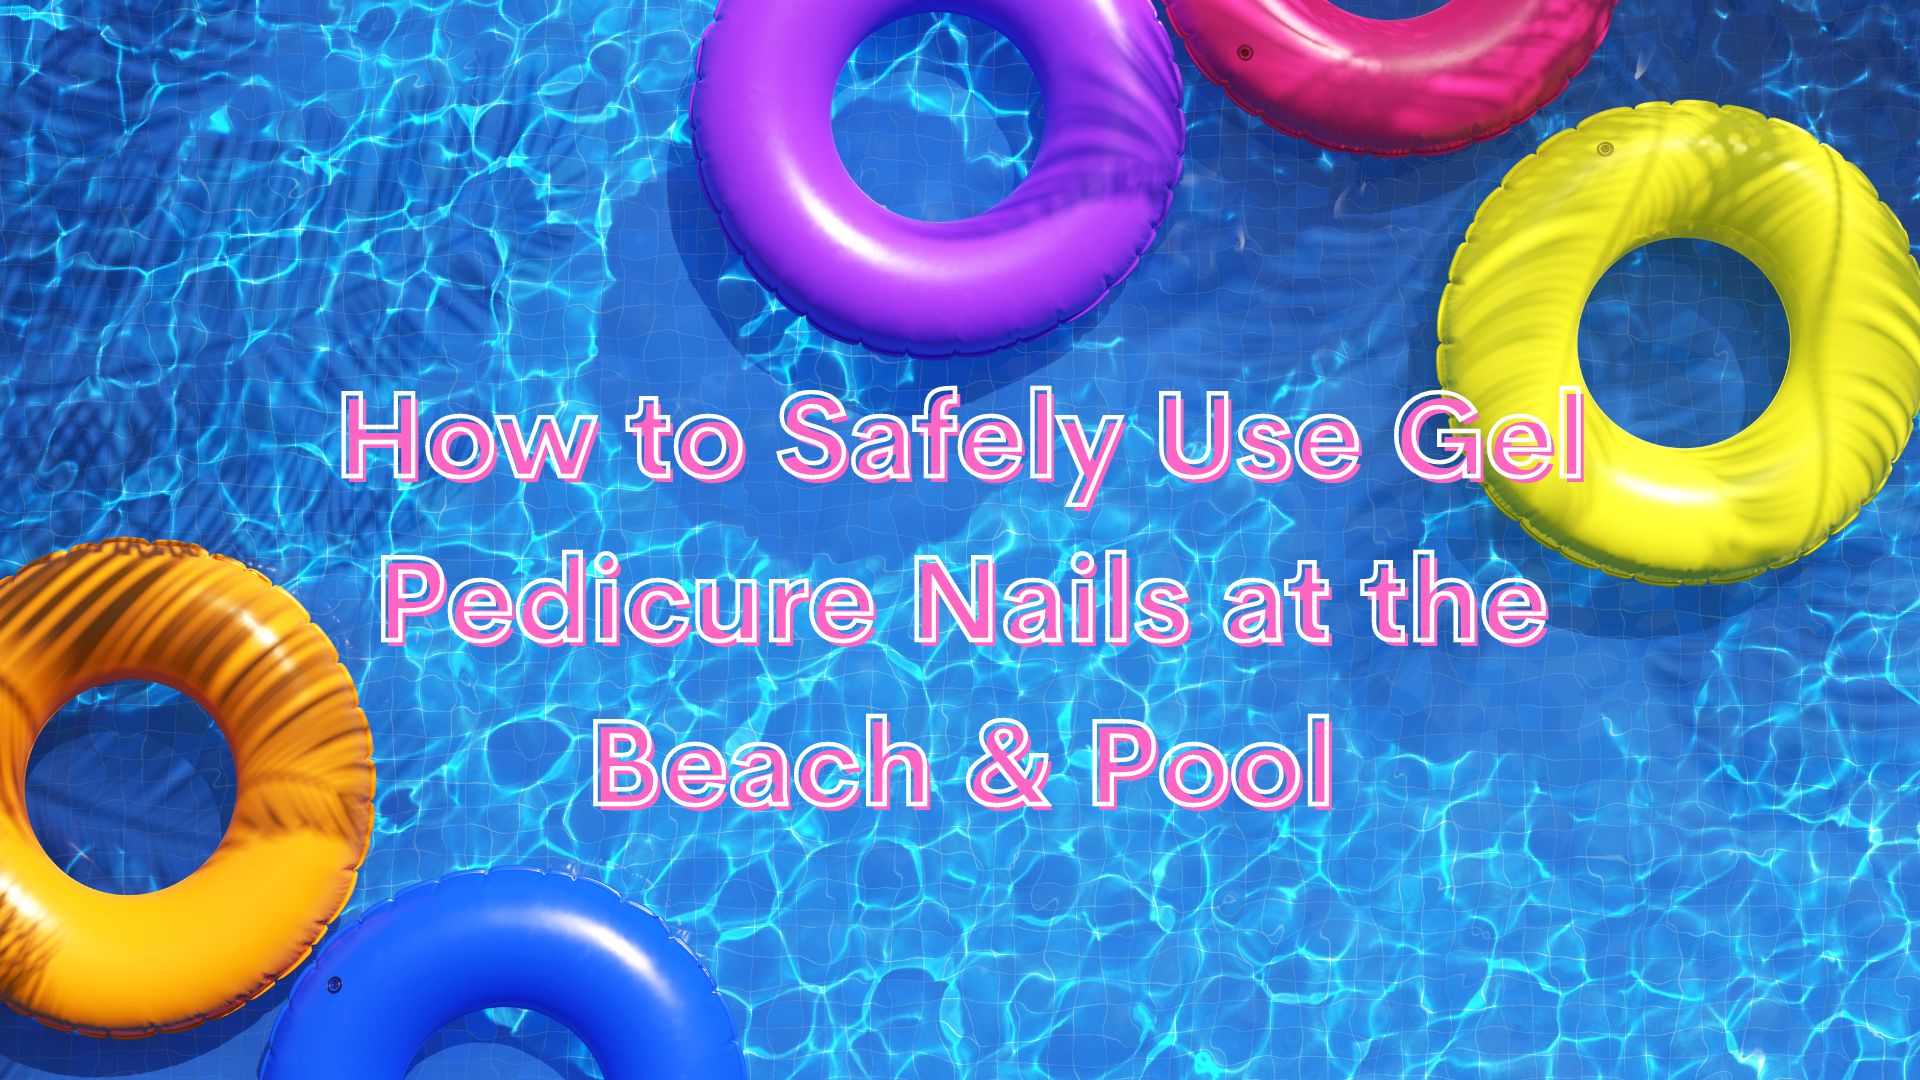 How to Safely Use Gel Pedicure Nails at the Beach & Pool